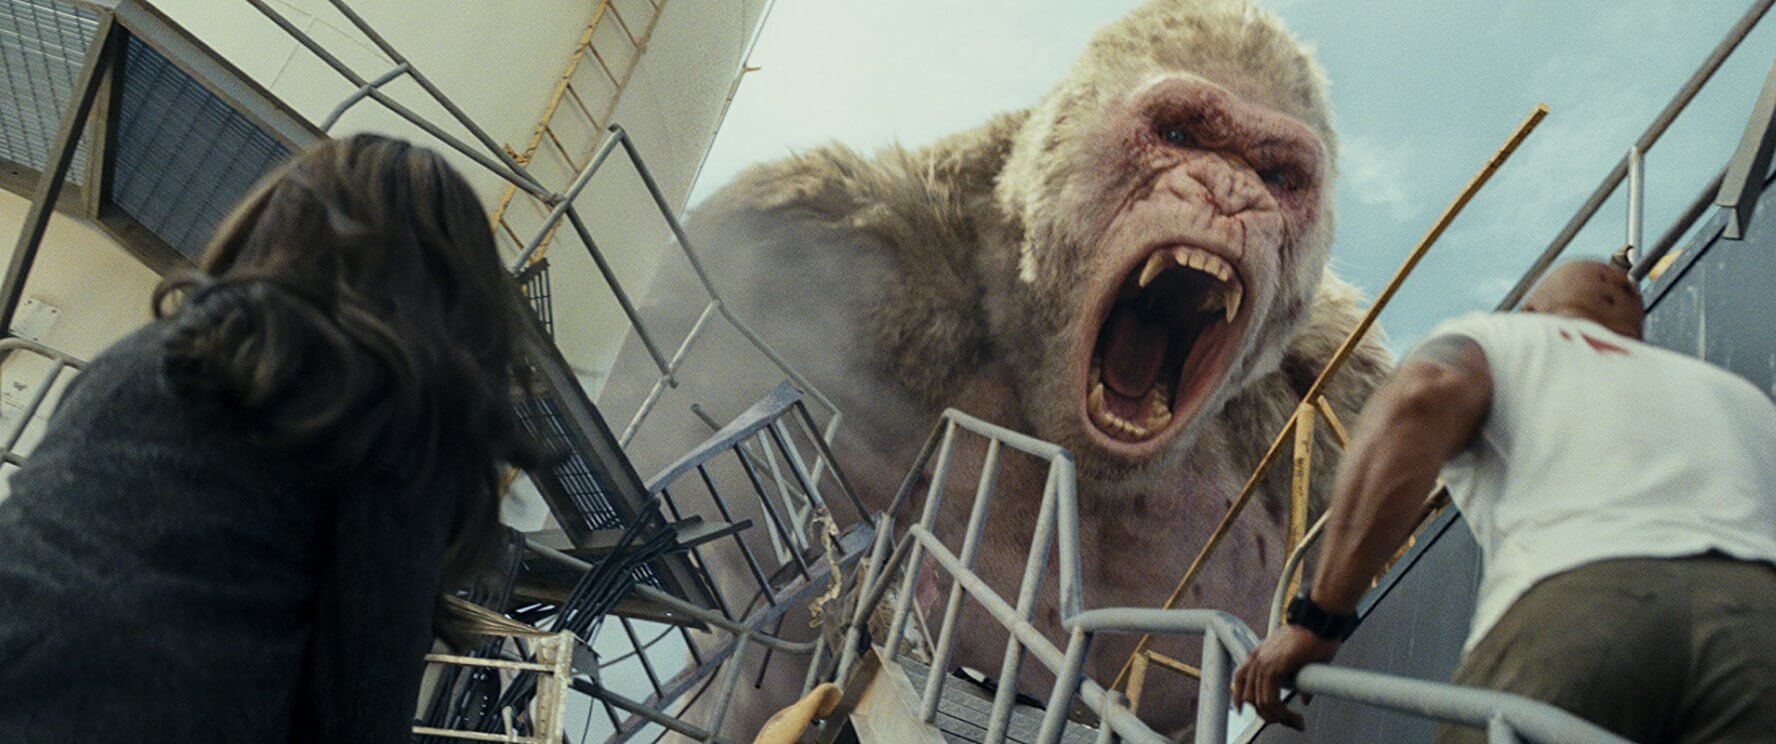 rampage full movie review